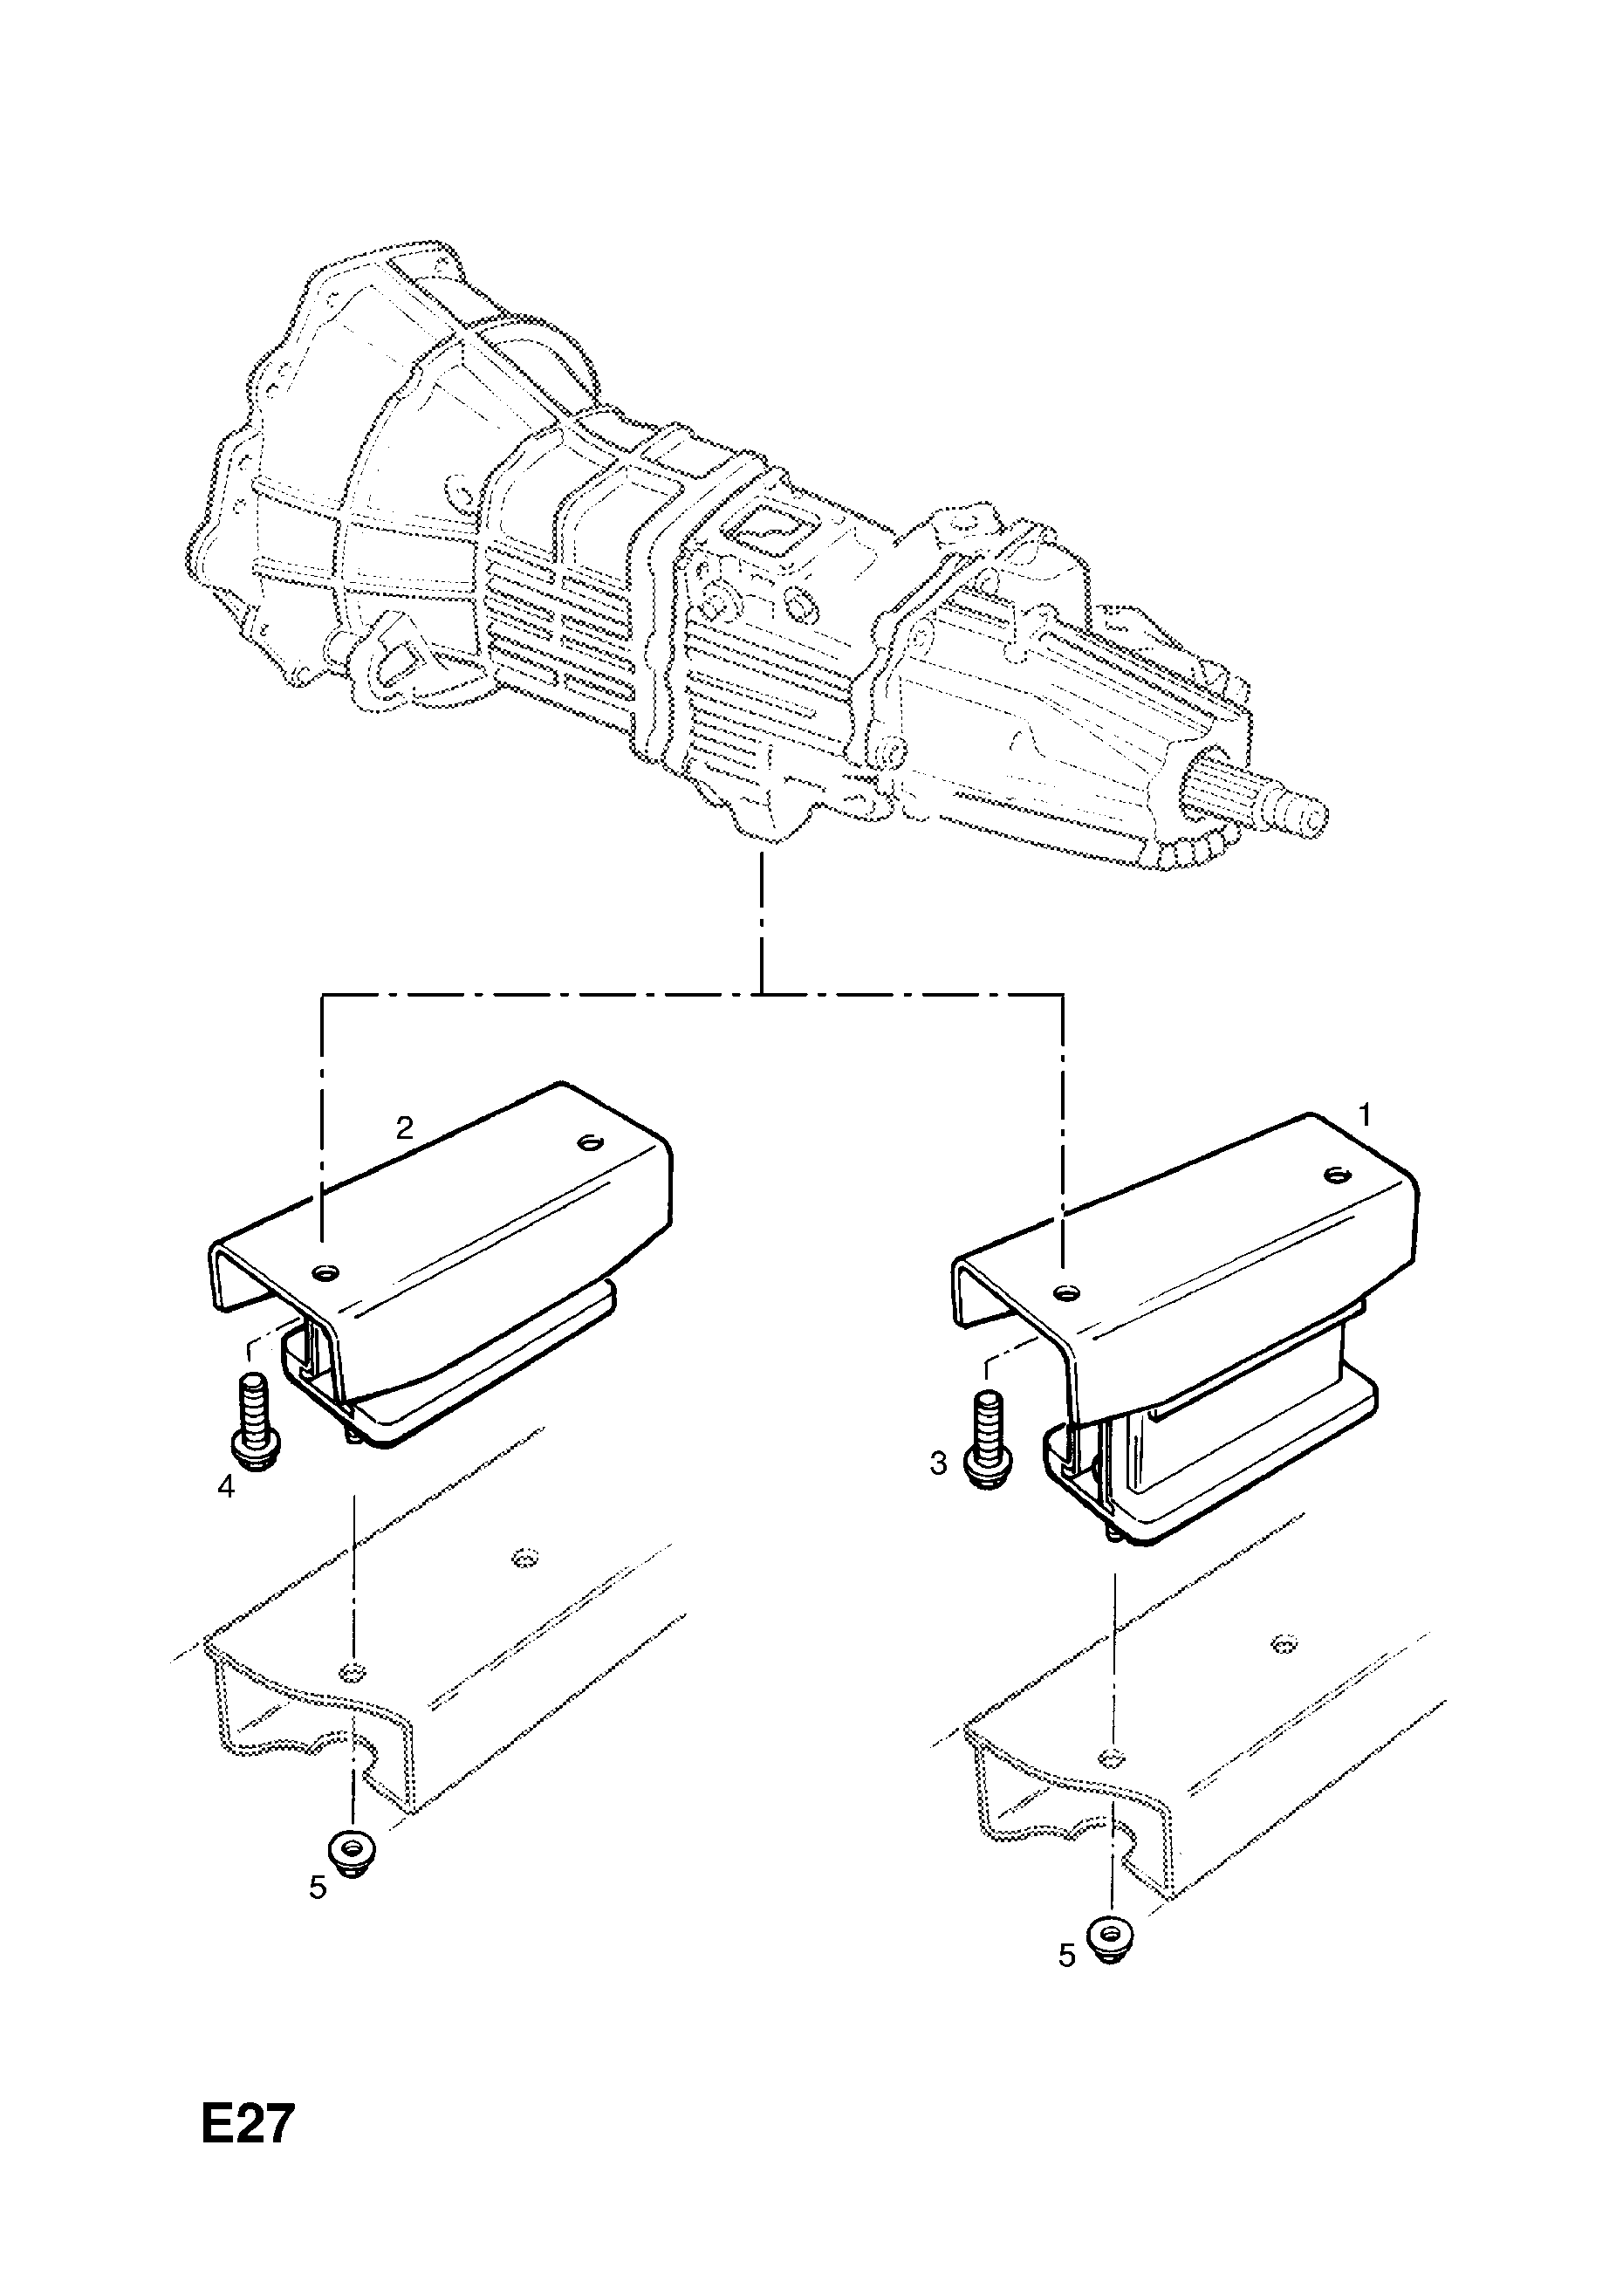 ENGINE MOUNTINGS (CONTD.) <small><i>[ENGINE REAR]</i></small>